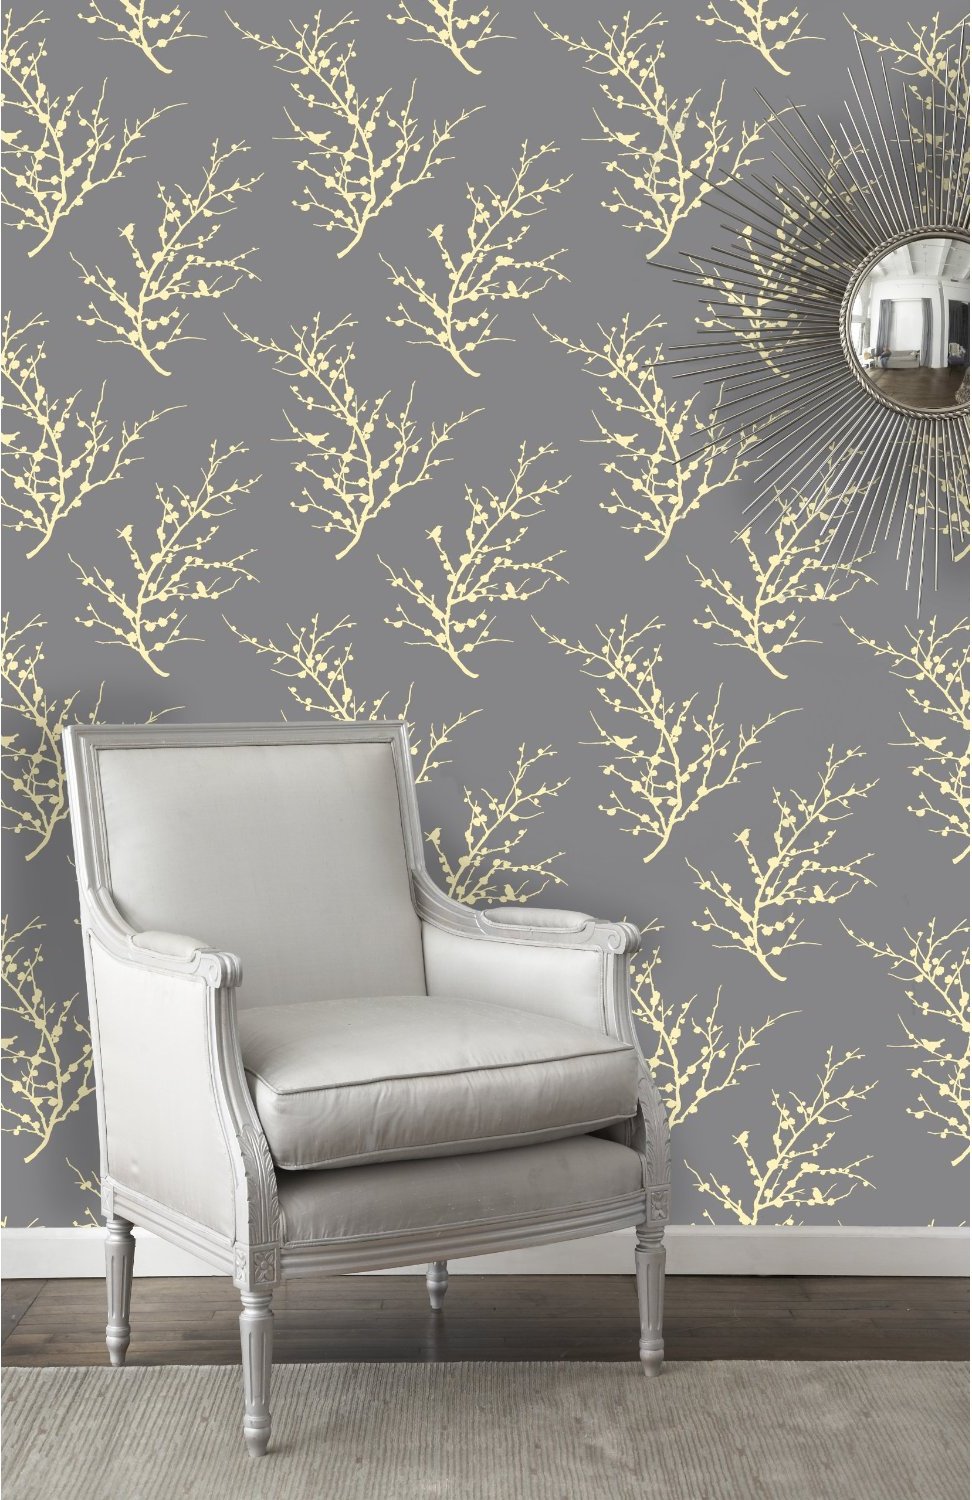 Make Your Own Wallpaper With Fancy Masking Tape